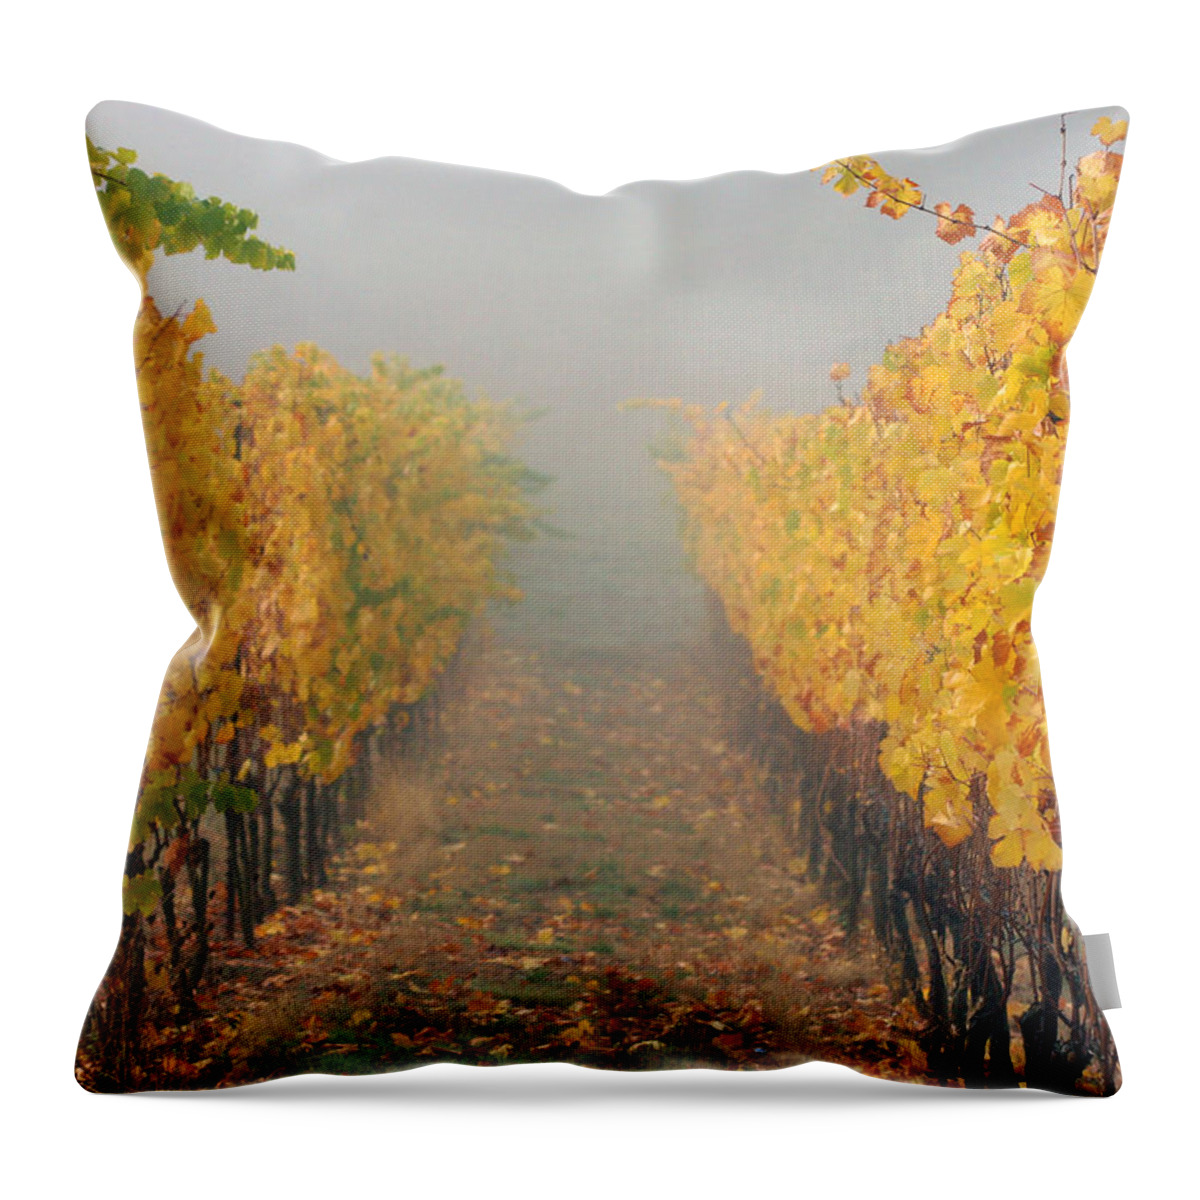 Grape Throw Pillow featuring the photograph Fall Vines by Jean Noren